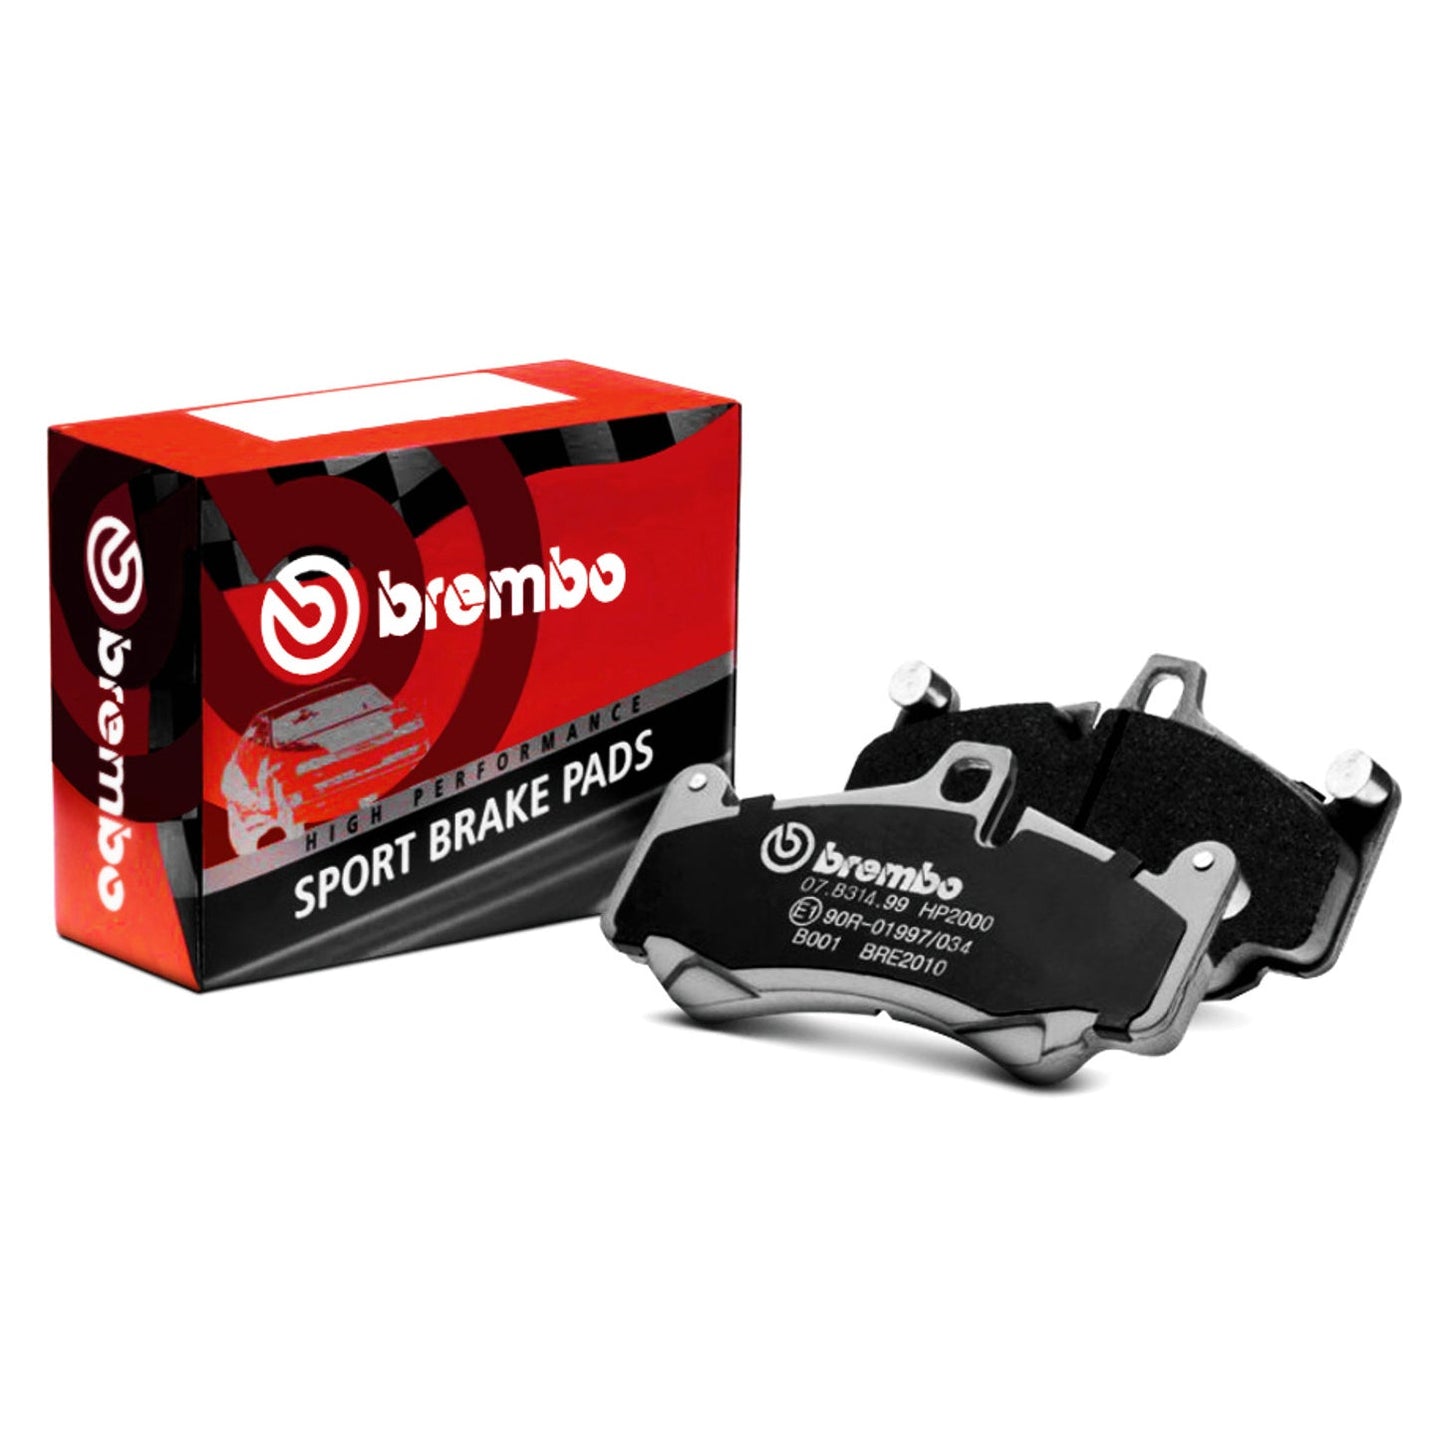 Brembo Sport HP2000 Front Brake Pads for BMW 7 Series (E38) 728i X 193bhp (94-01)